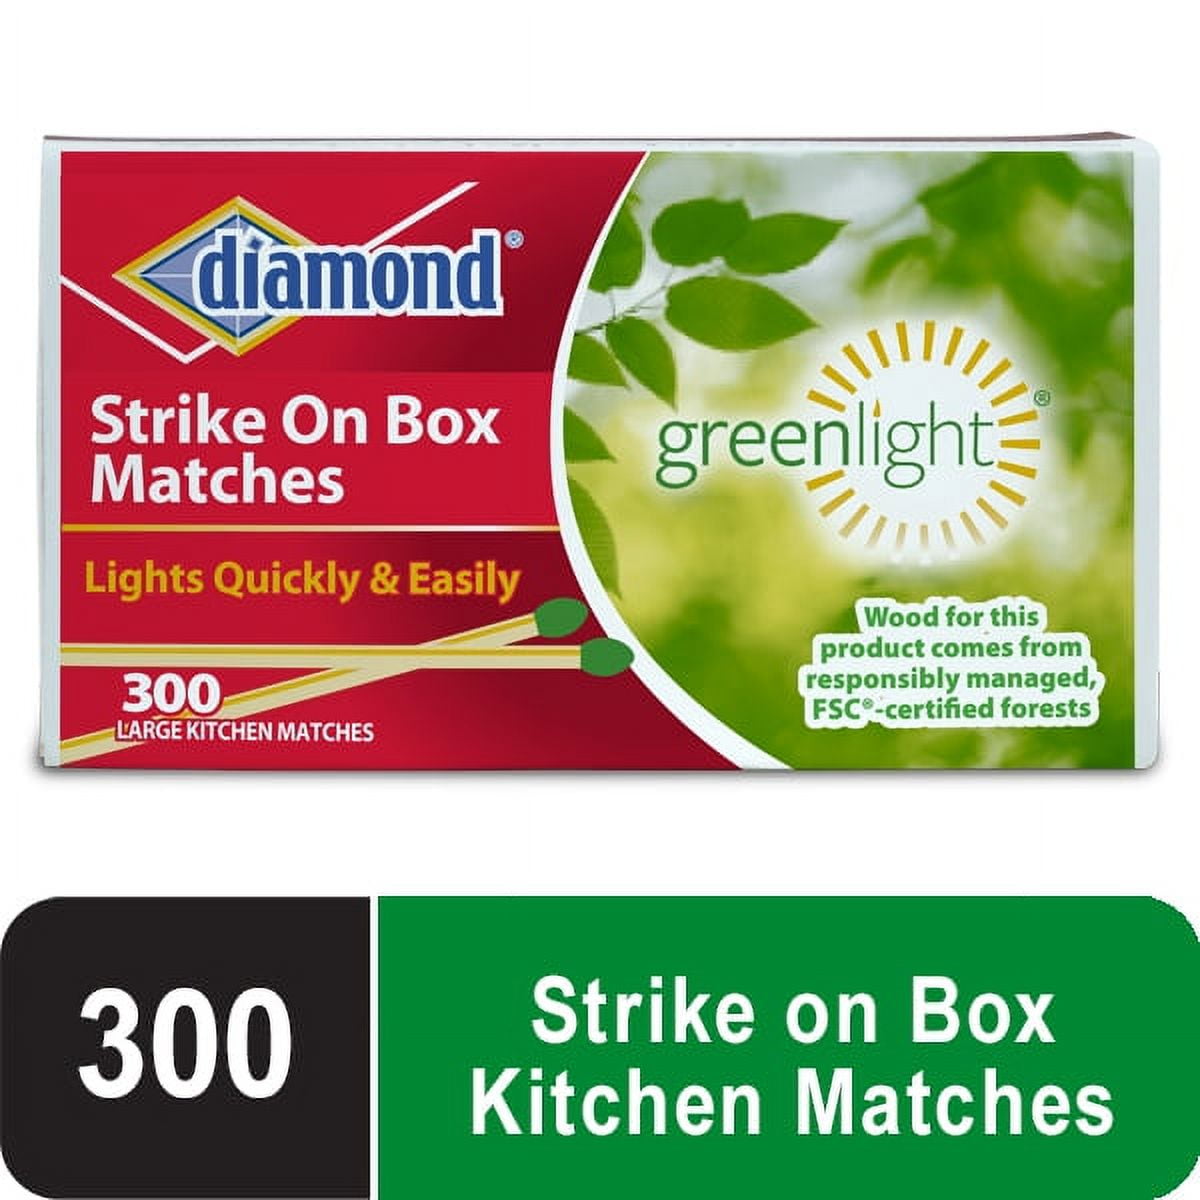 250 Plain White Cover Wooden Matches Box Matches (5 BOXES OF 50)